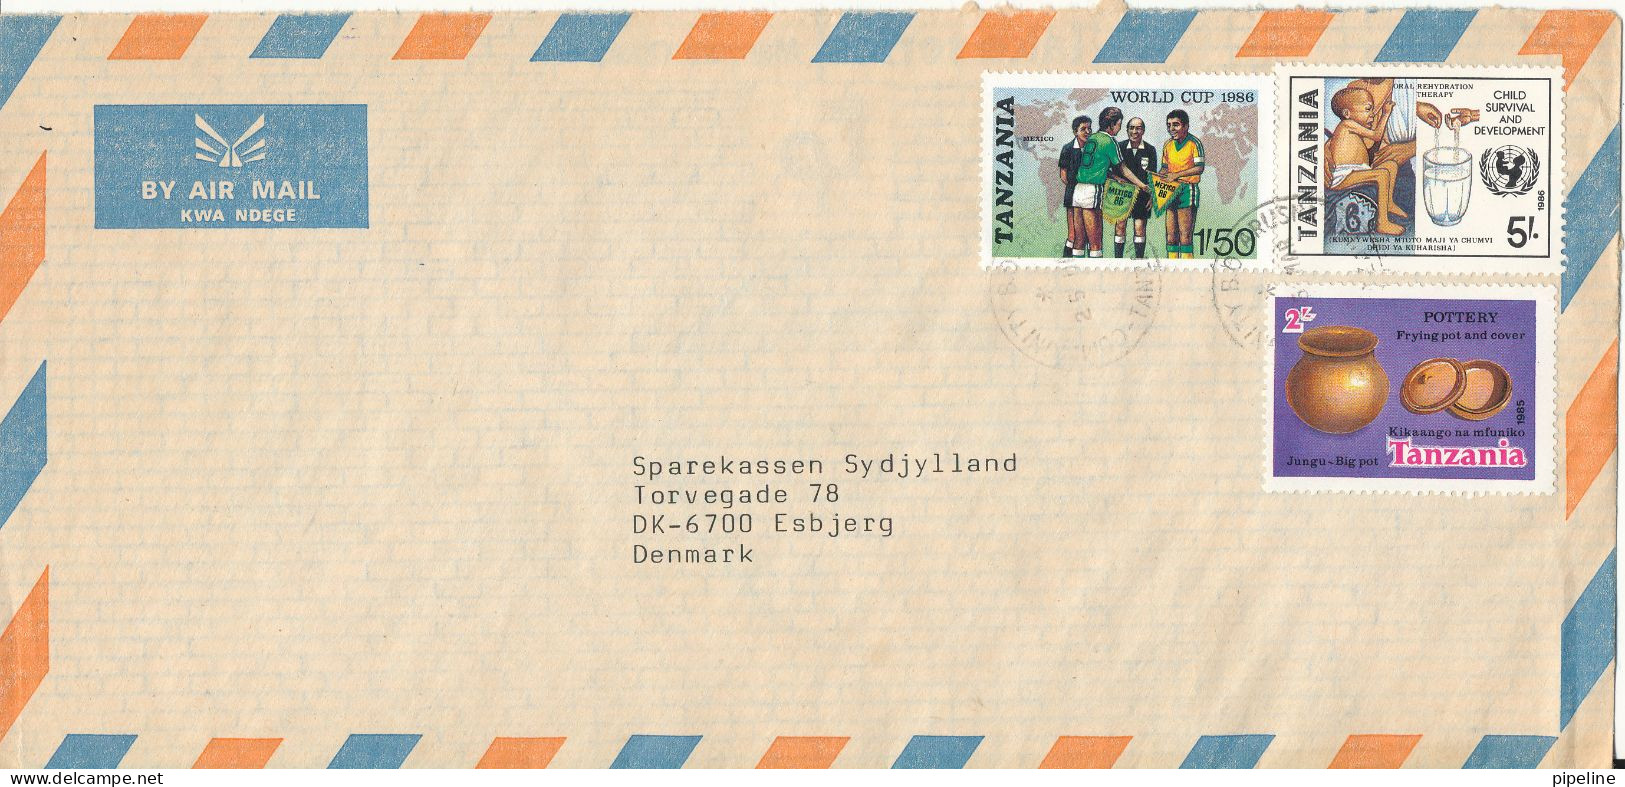 Tanzania Air Mail Cover Sent To Denmark Topic Stamps Incl. SOCCER FOOTBALL WORLD CUP MEXICO 1986 - Tanzania (1964-...)